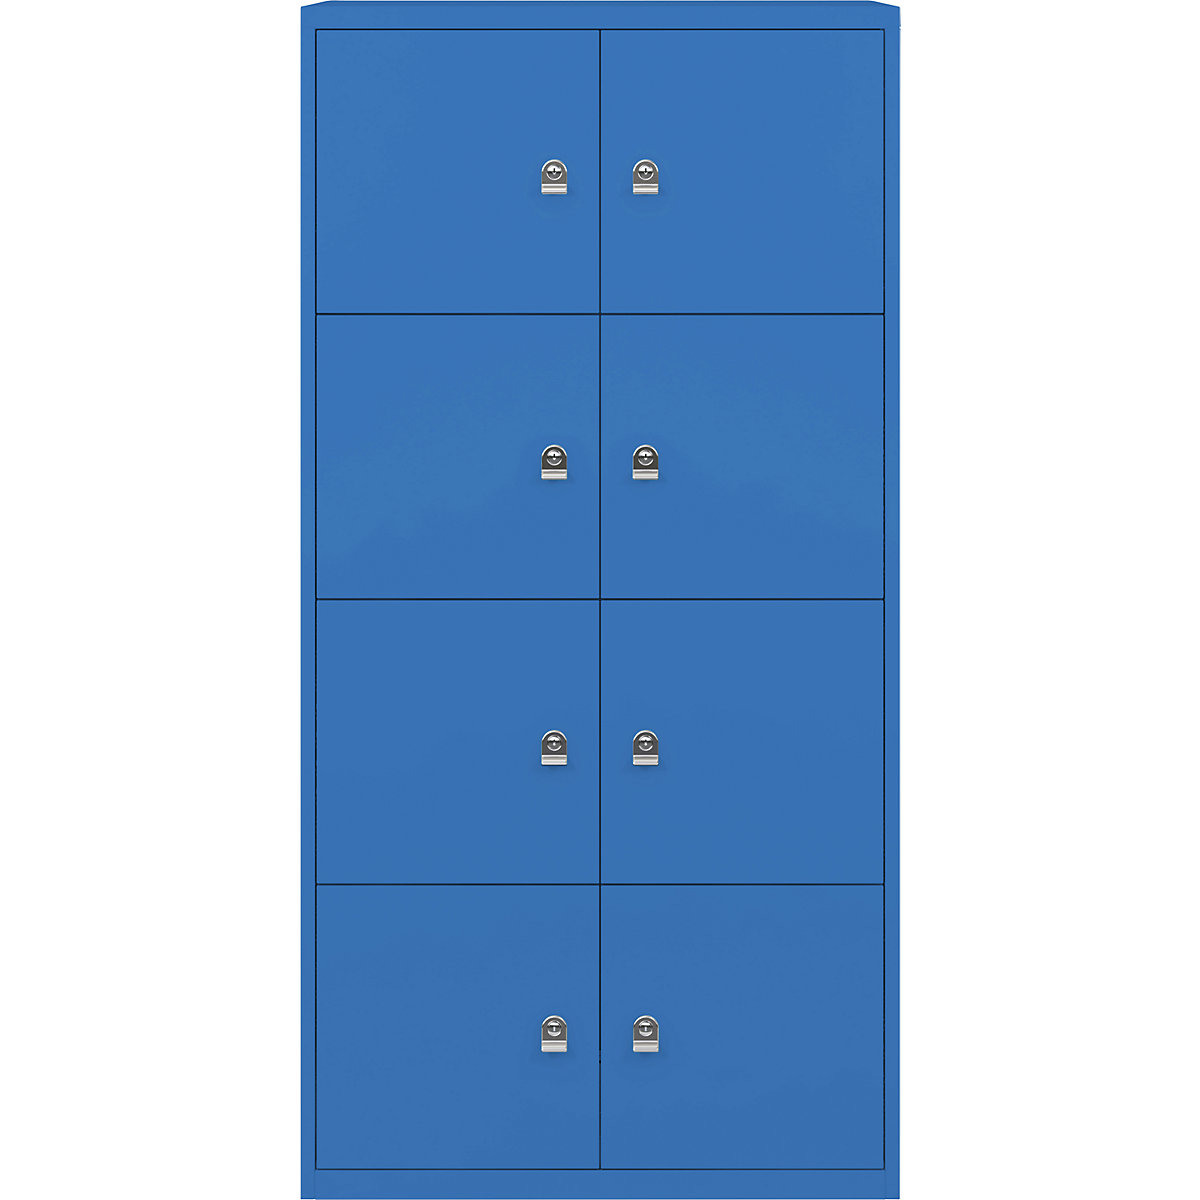 BISLEY – LateralFile™ lodge, with 8 lockable compartments, height 375 mm each, blue